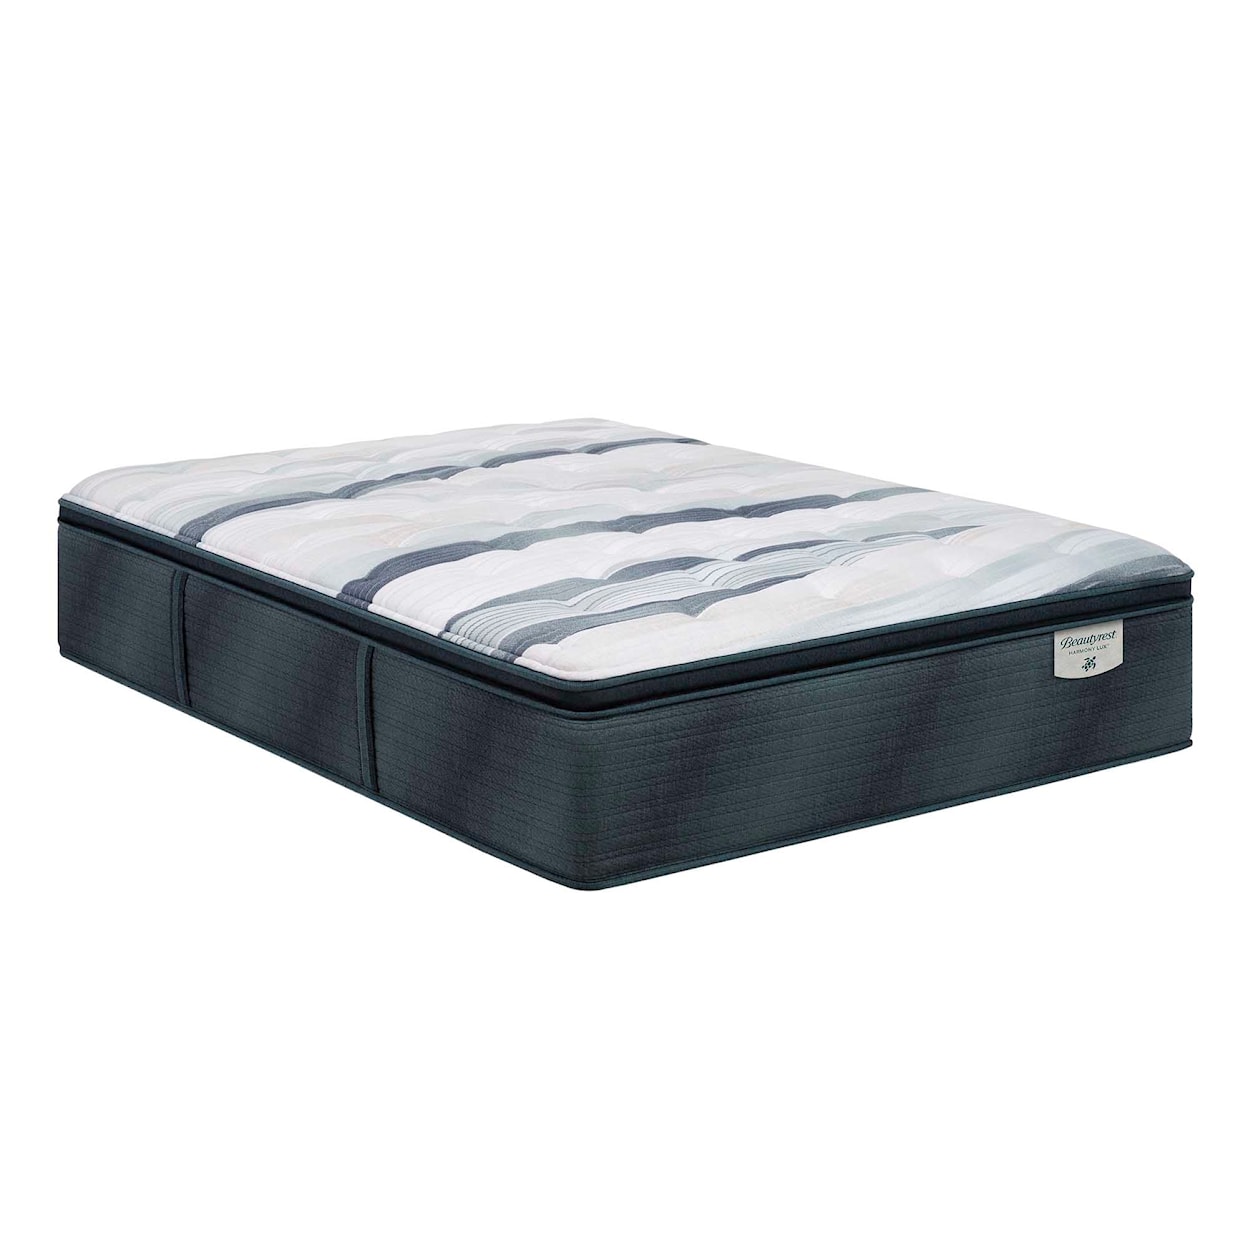 Beautyrest Harmony Lux CORAL ISLAND PL PT California King Mattress